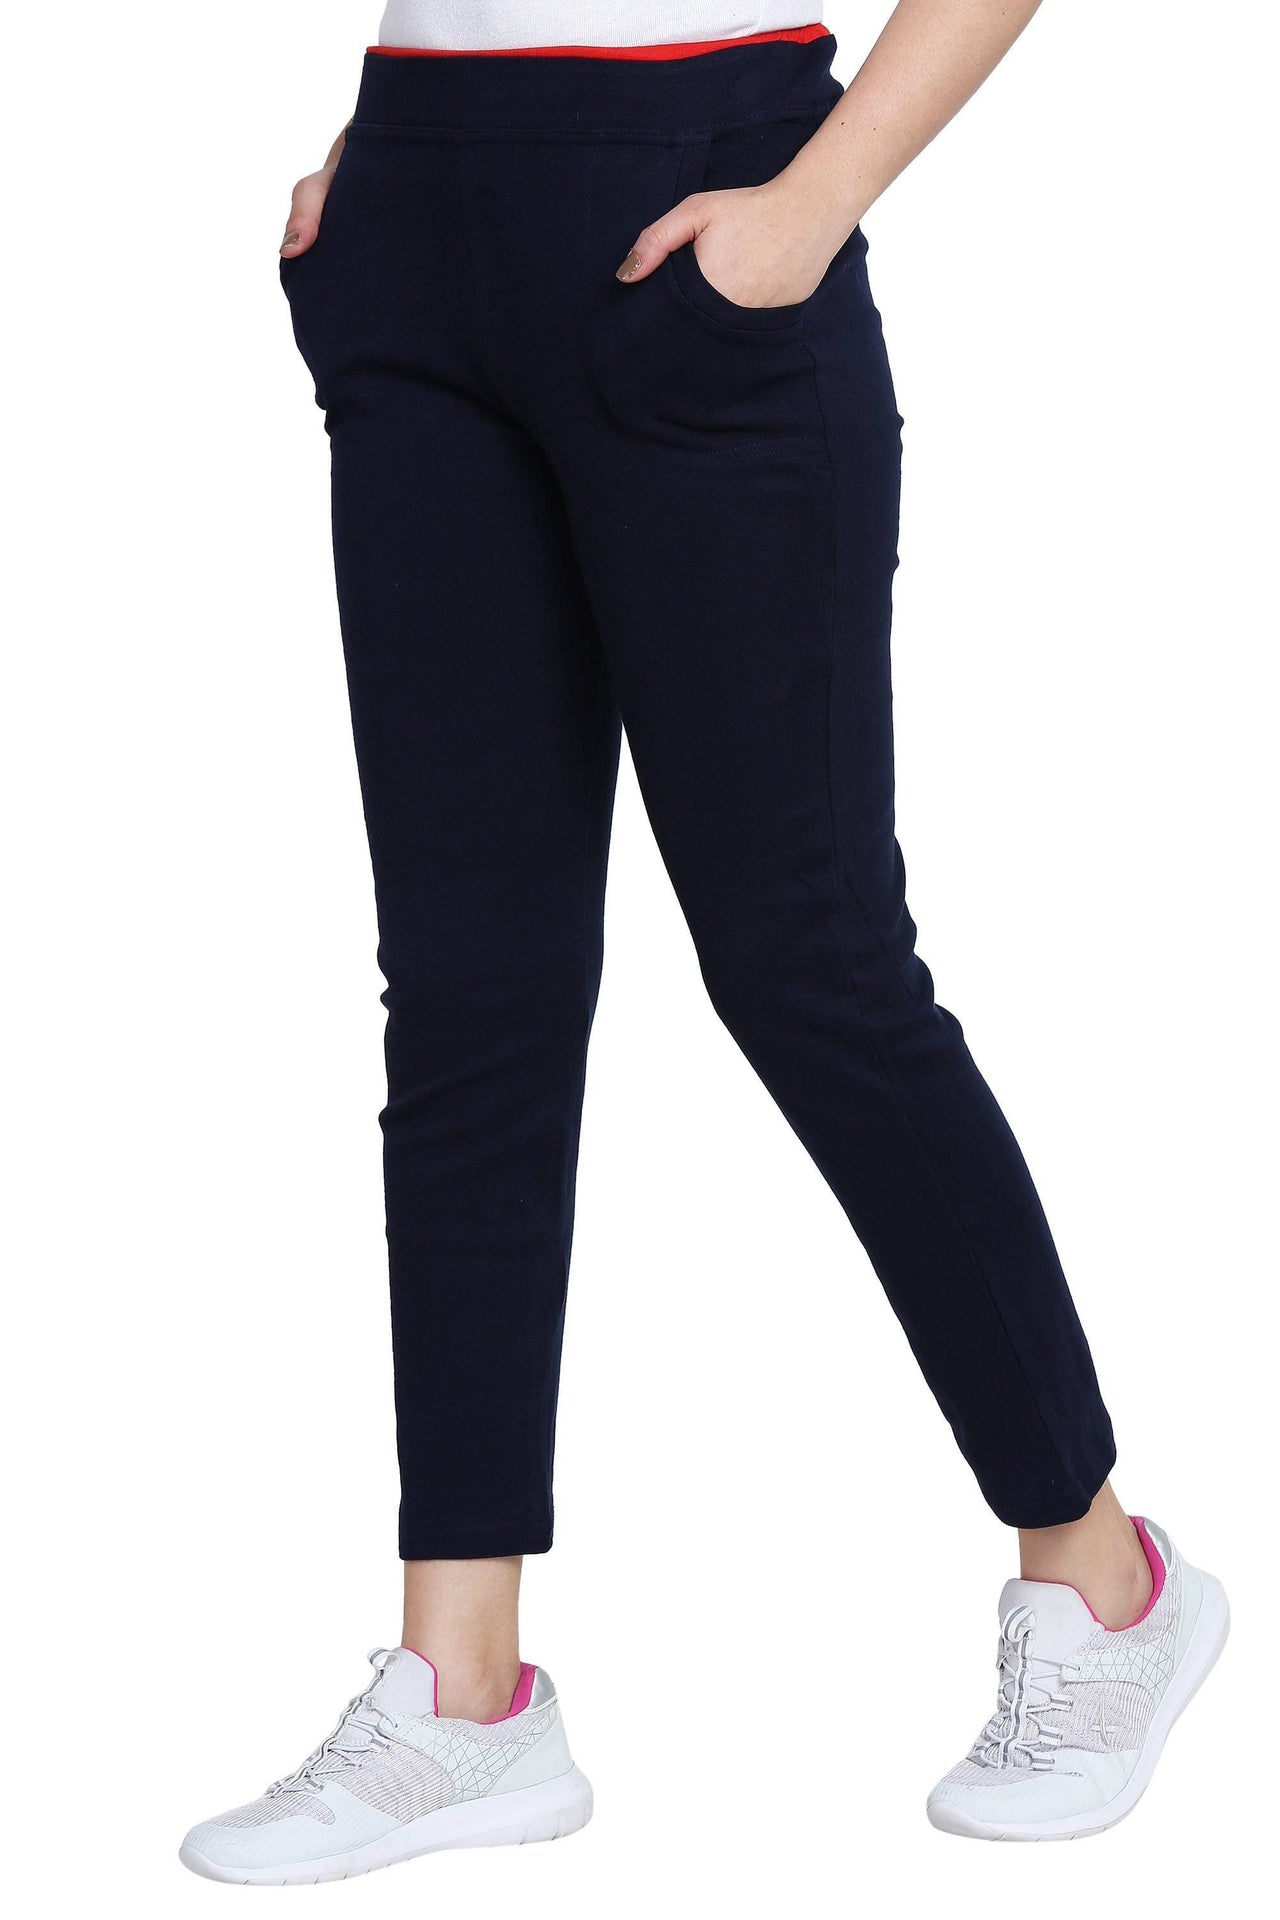 Asmaani Navy Blue color Hosiery Lower with Two Side Pockets.